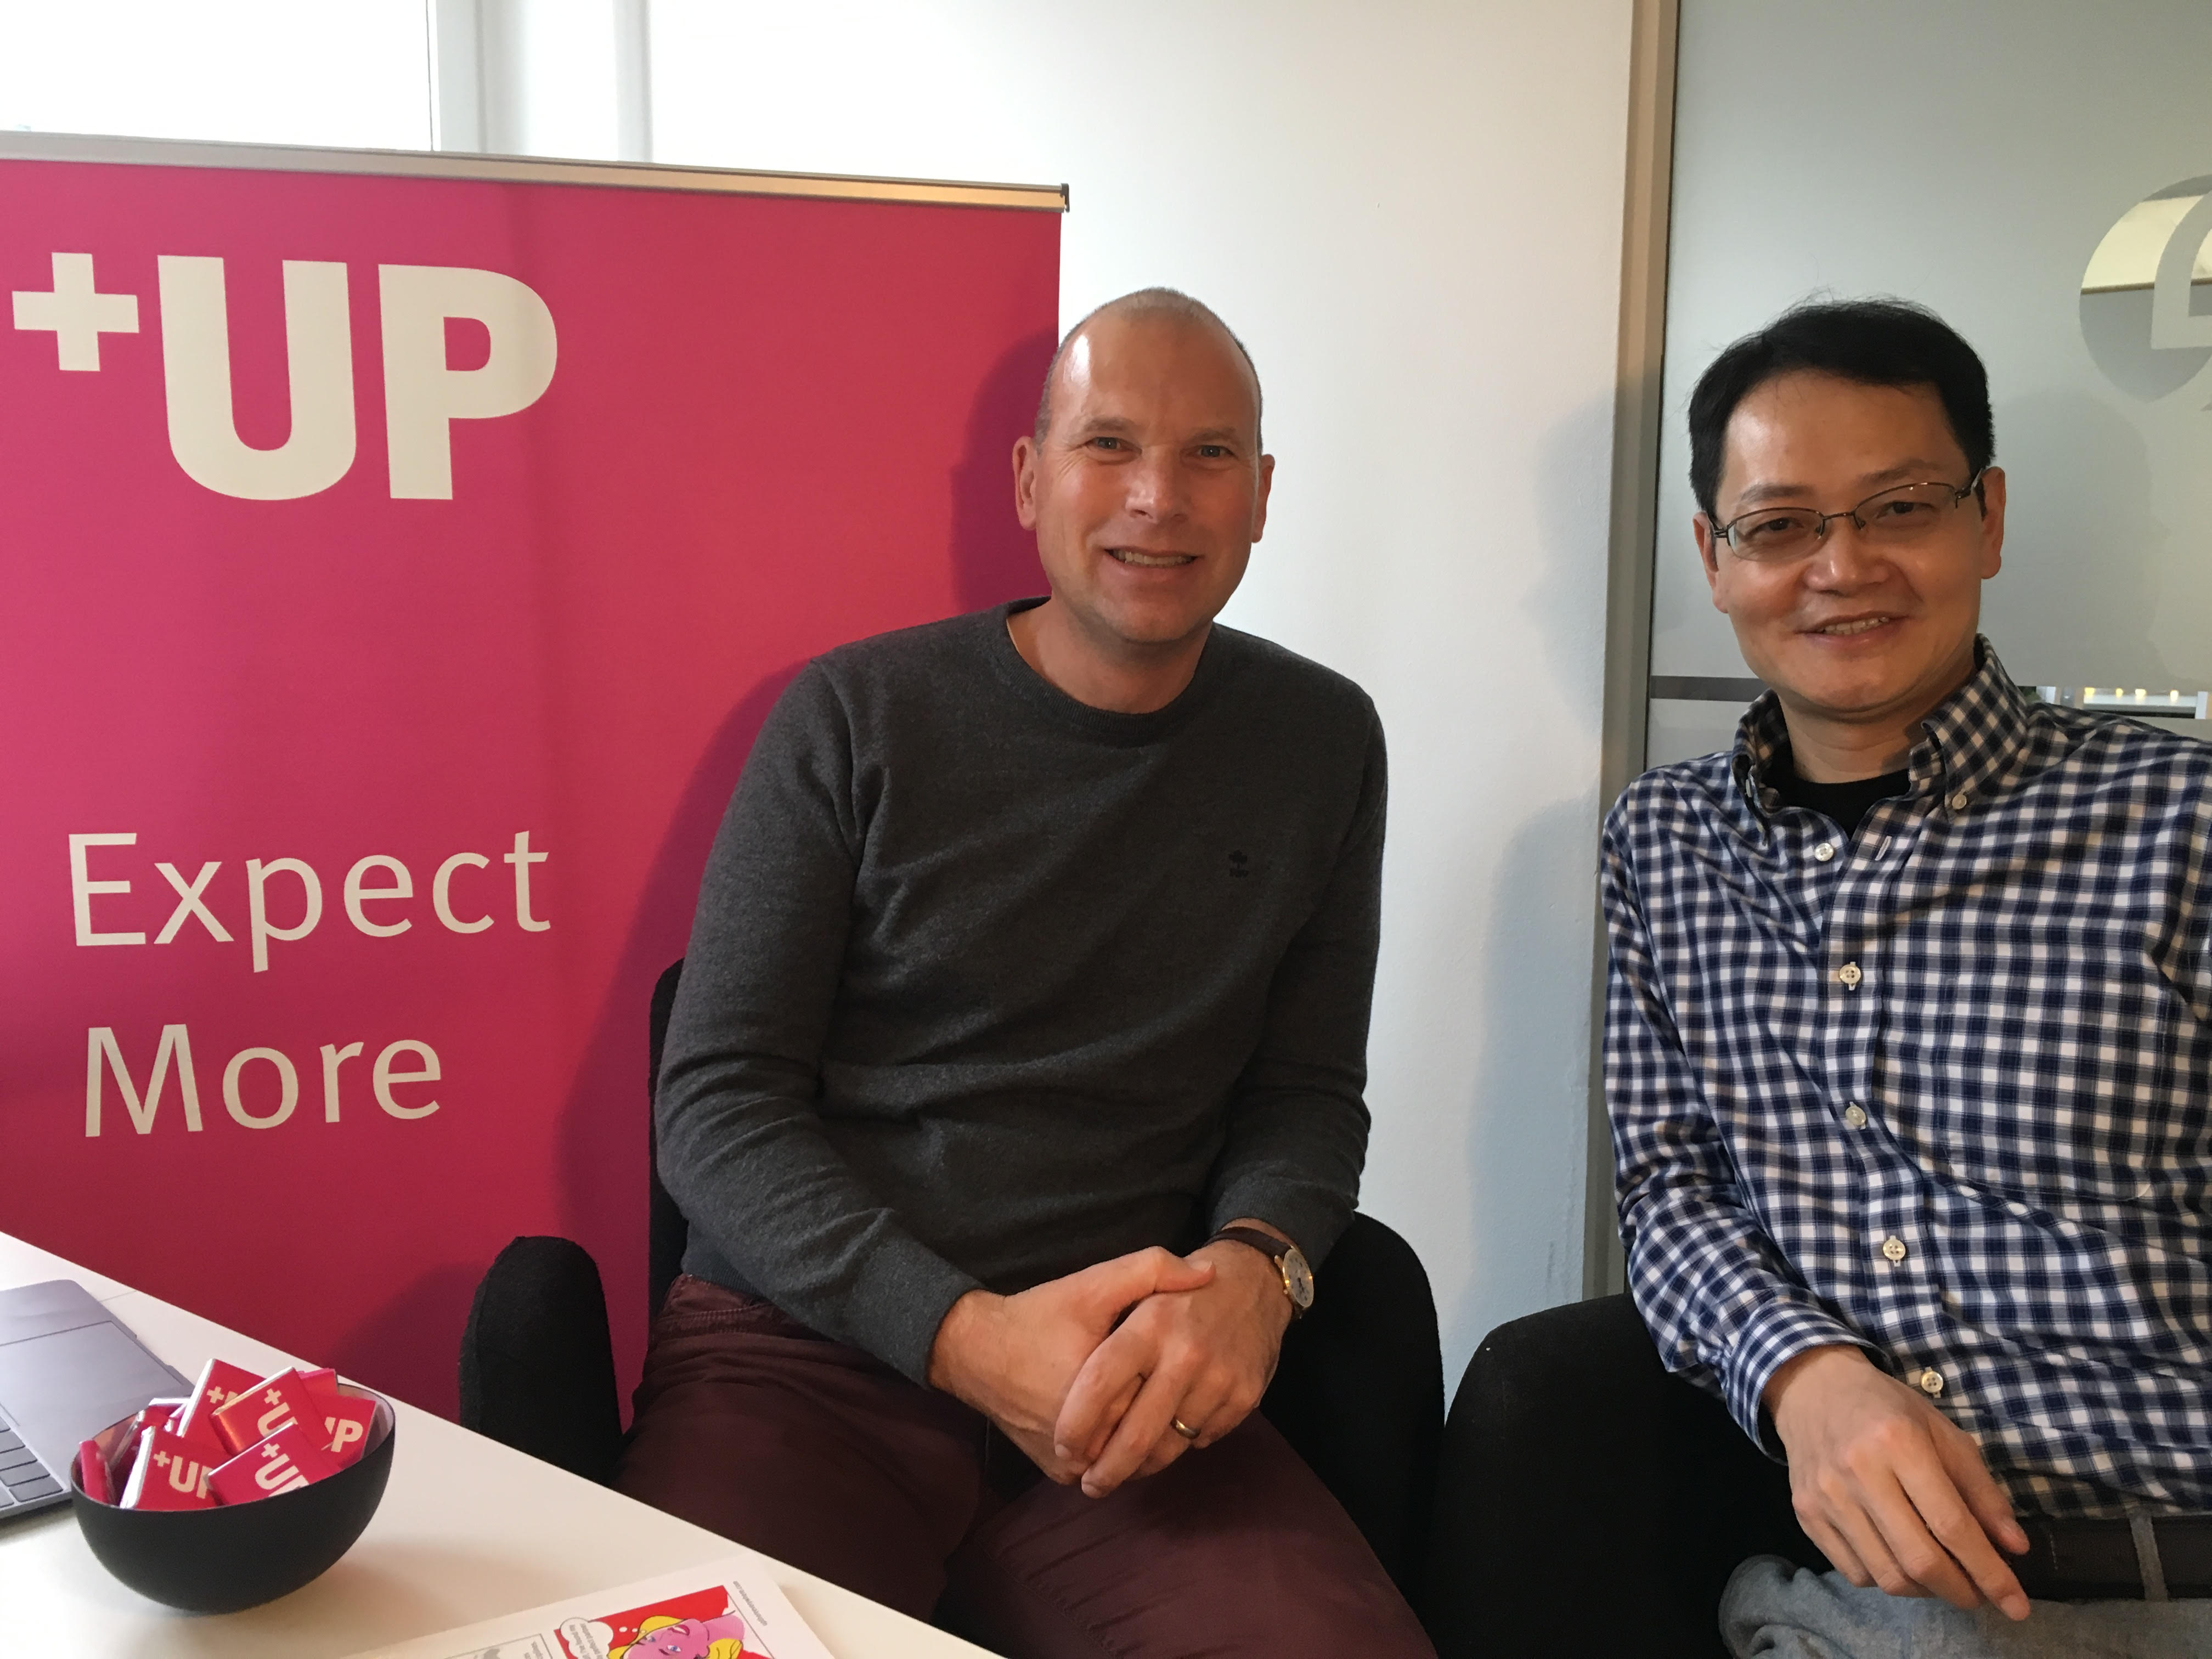 UP members lawrence masle and michael zhou